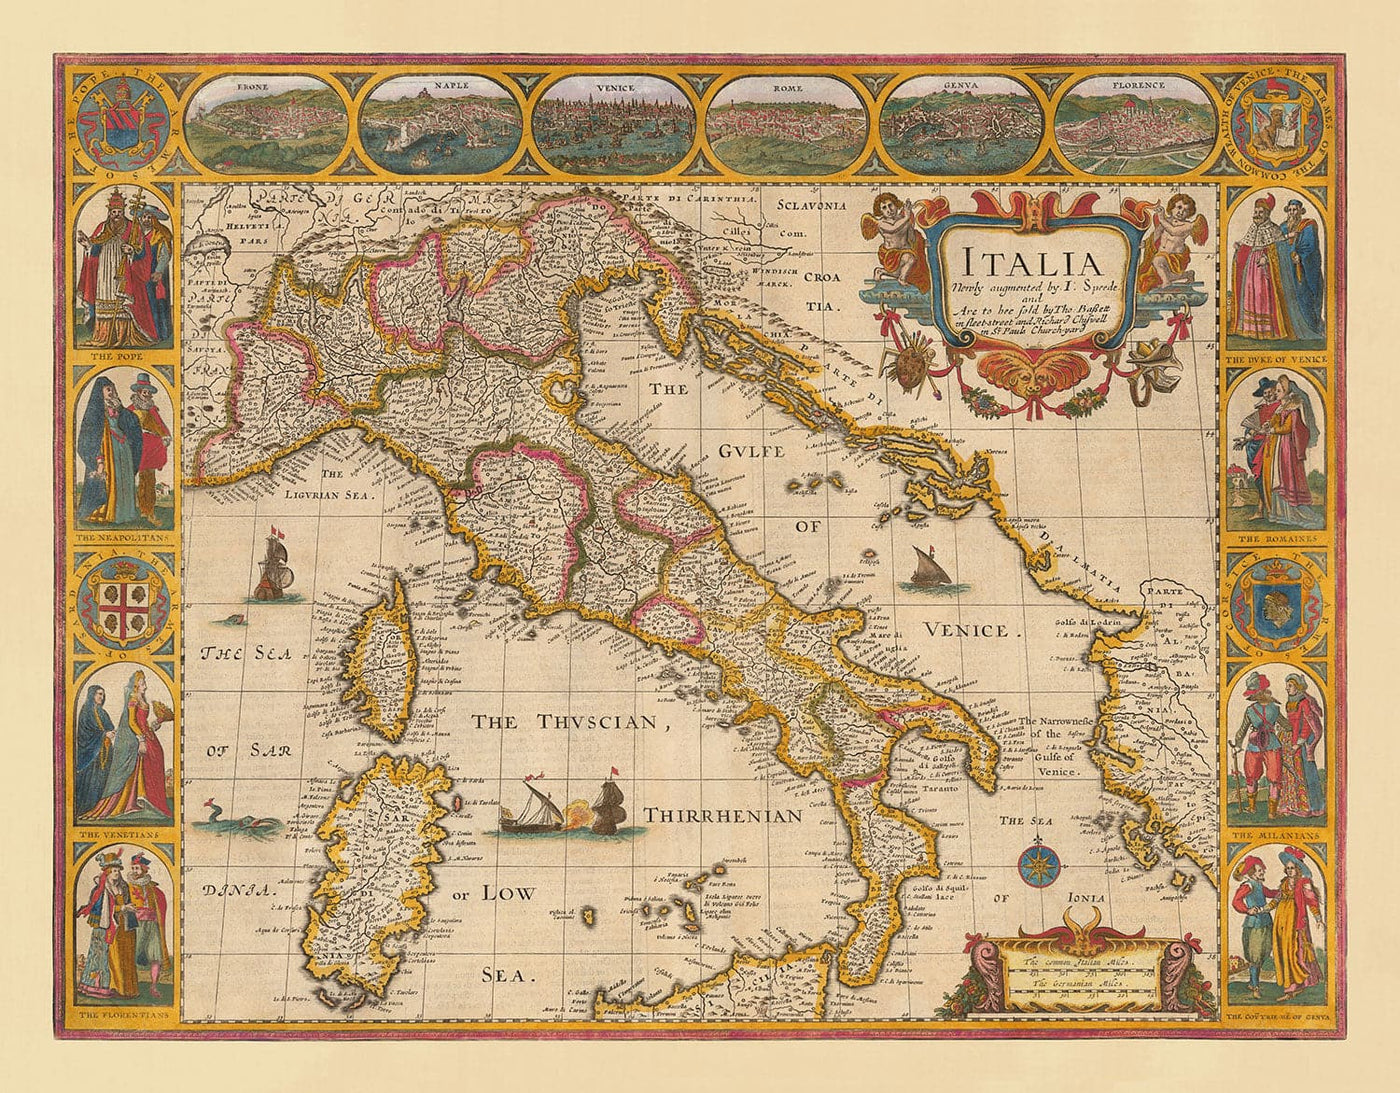 Old Handcoloured Map of Italy, 1627 by John Speed - Corsica, Sardinia, Sicily, Venice, Rome, The Pope